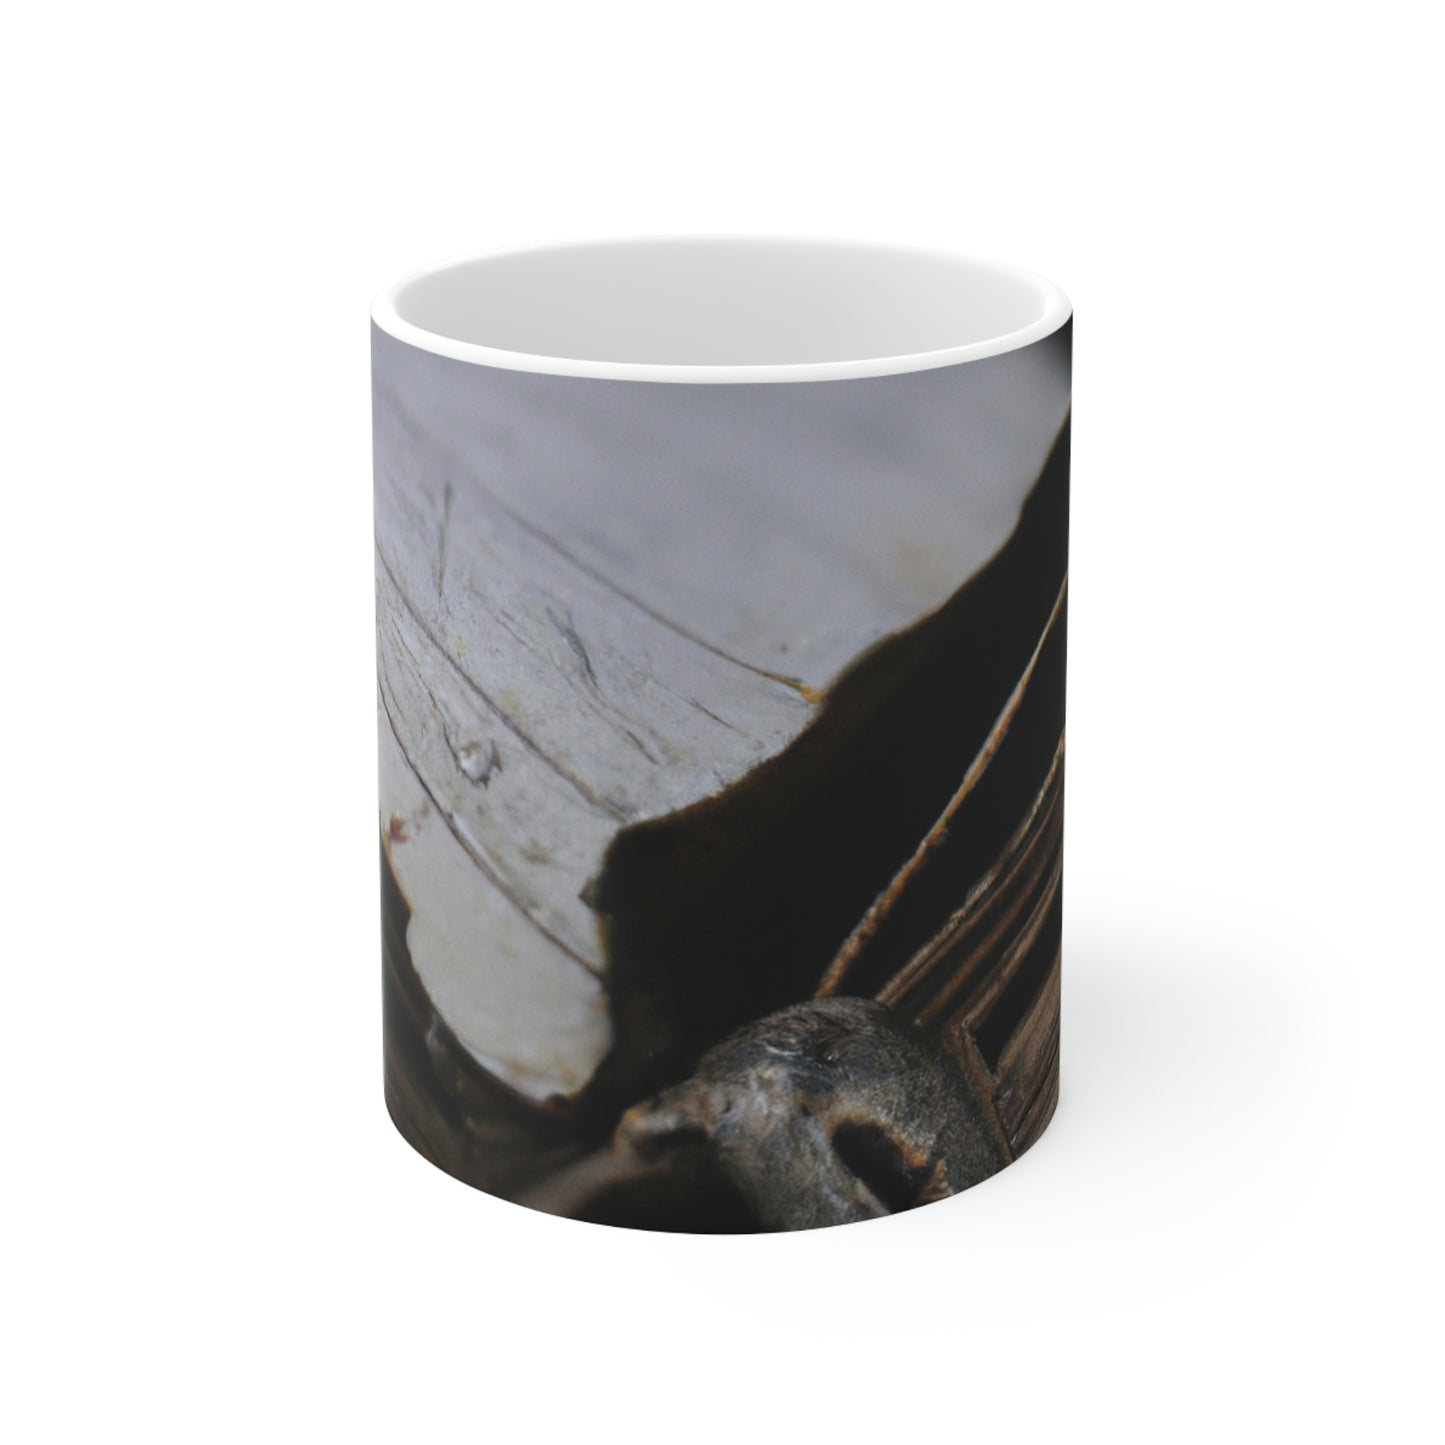 Unbeknownst to its readers, the book possesses magical powers.

"The Forgotten Tome of Magic" - The Alien Ceramic Mug 11 oz